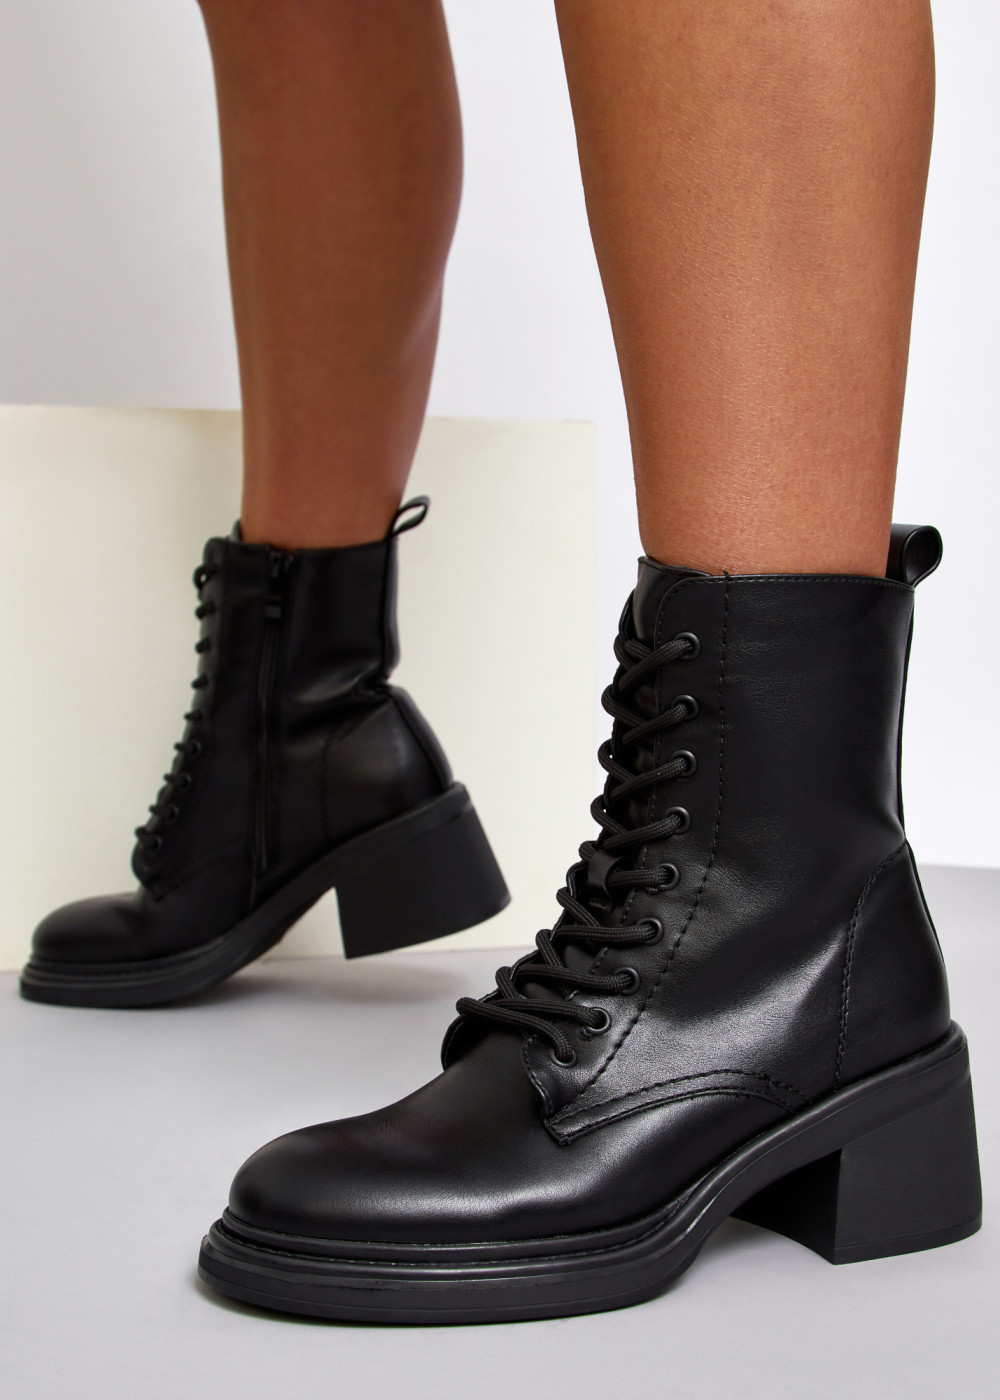 Black lace up heeled ankle boots 4